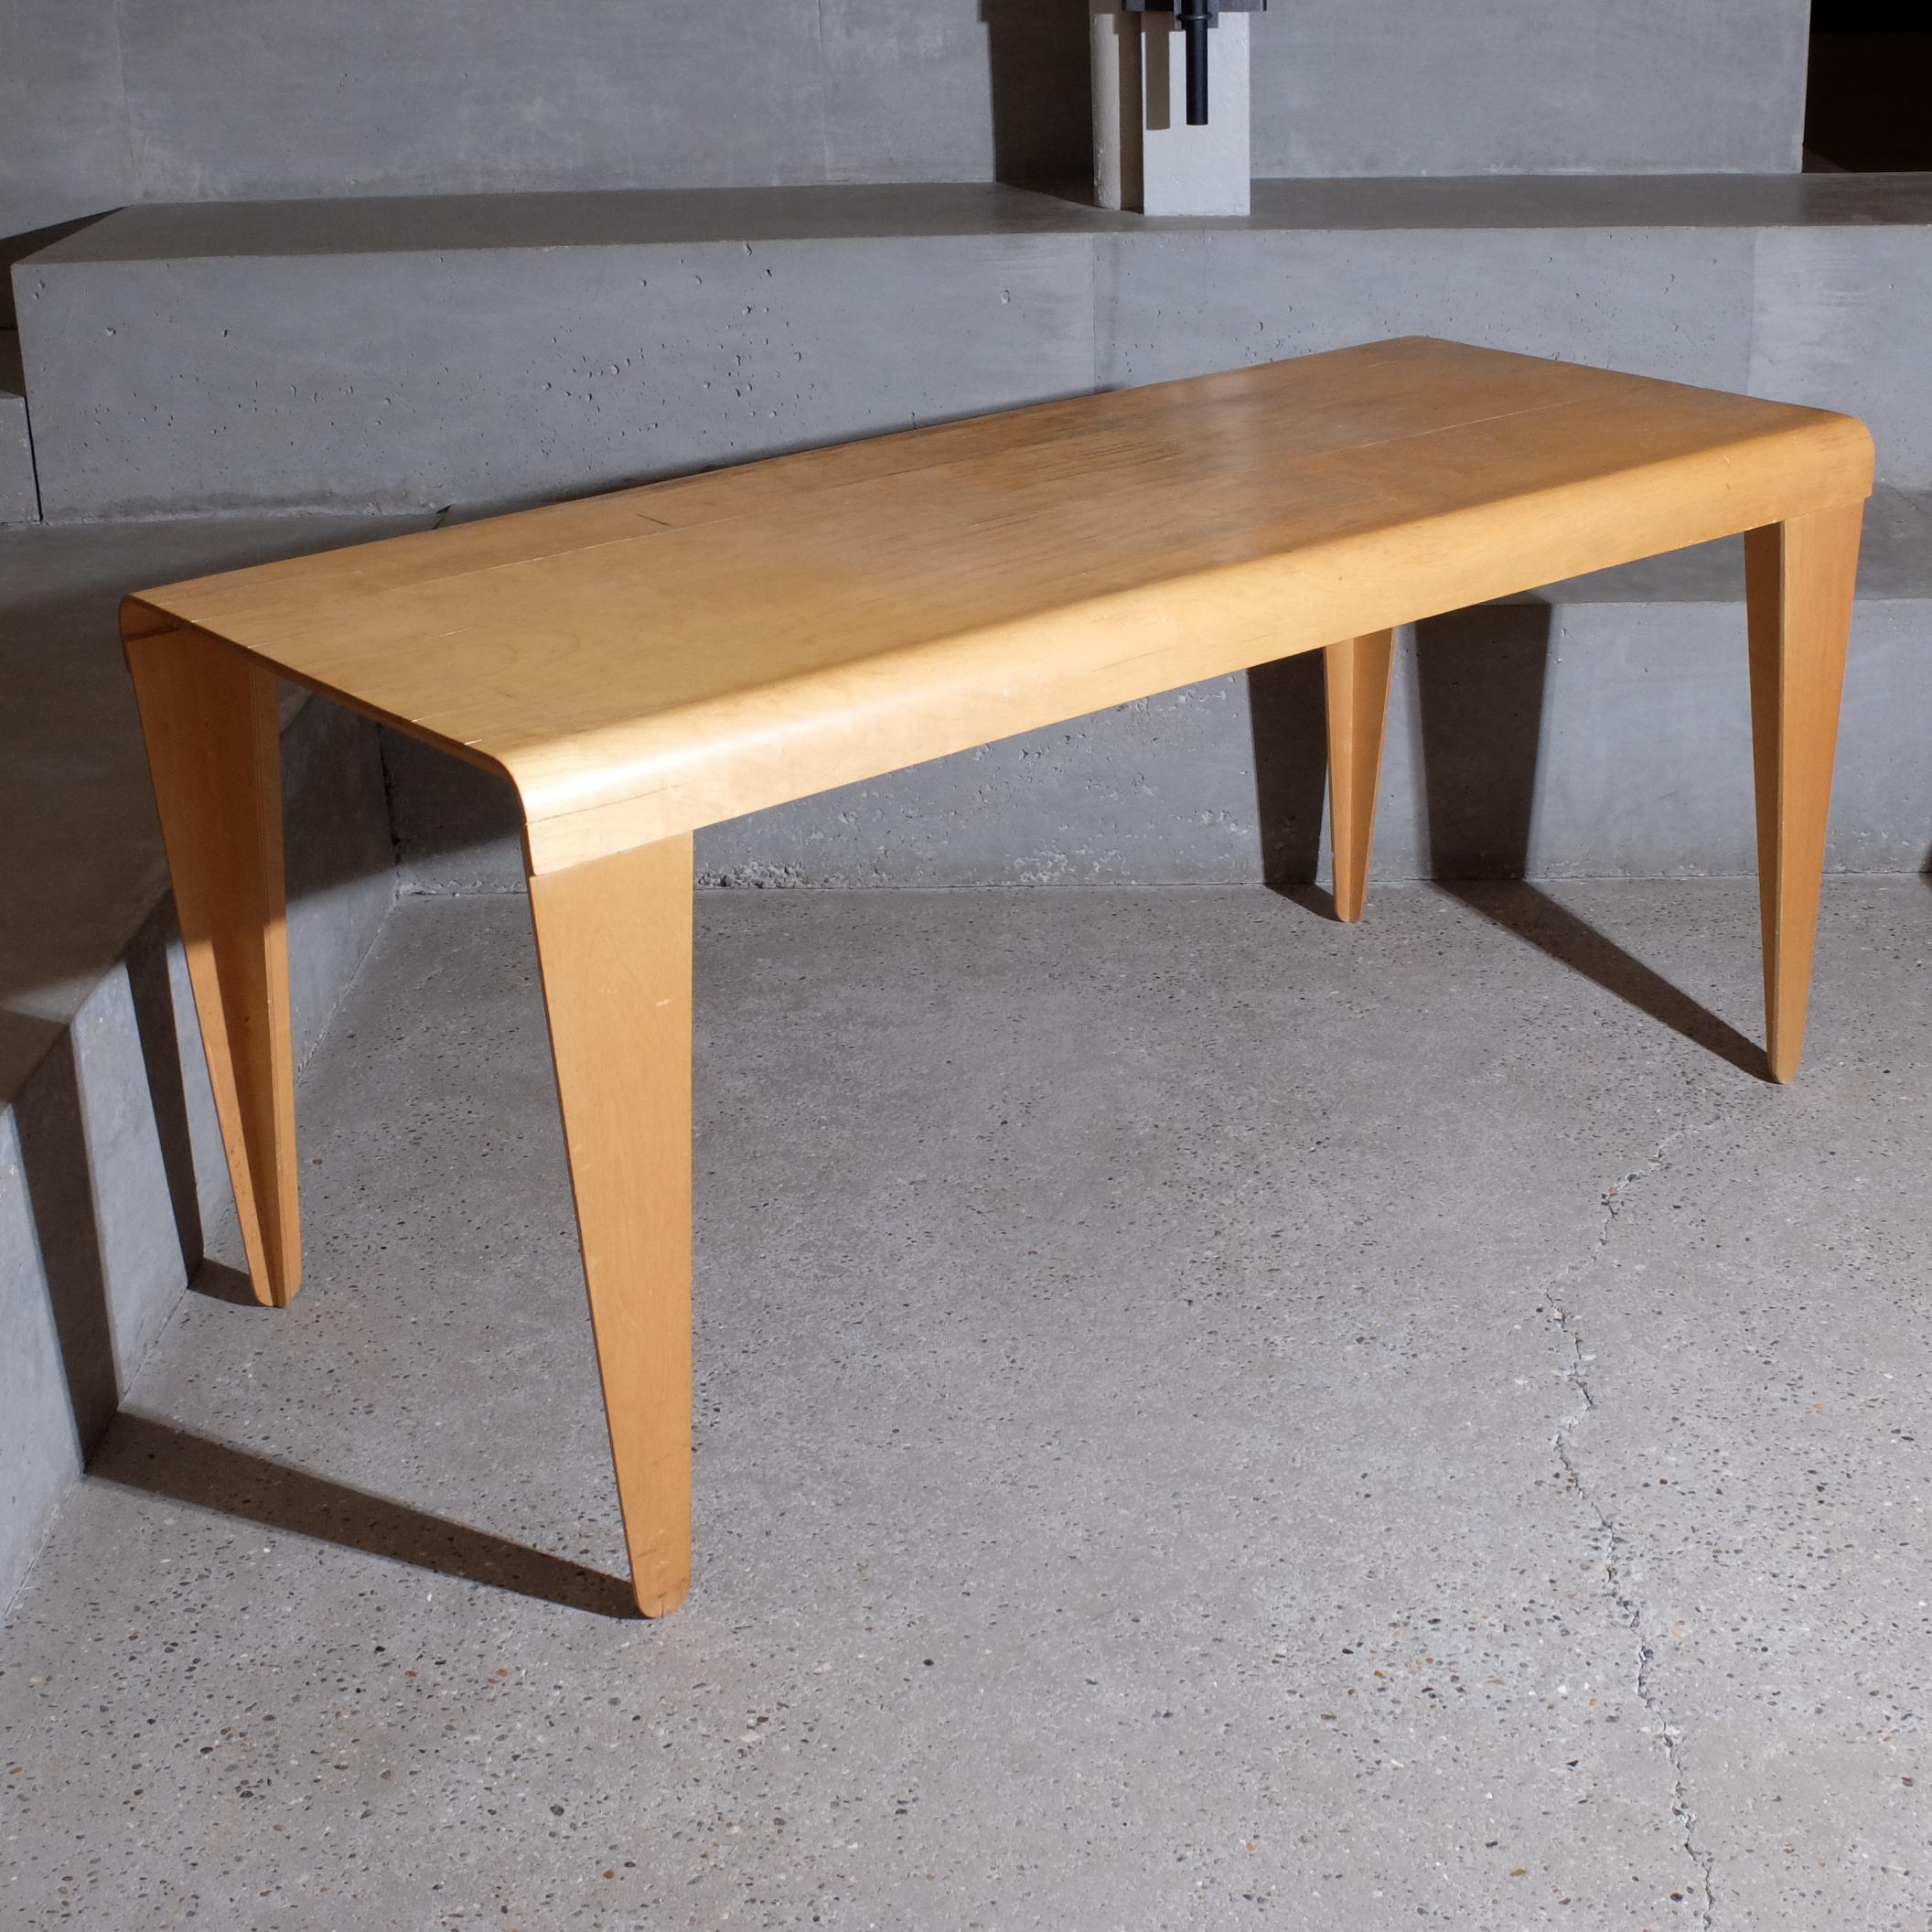 Isokon dinning table 1 out of 4 
Long version model in 157cm x 66 cm x 72 cm made in collaboration with Breuer, Gropius and Jack Pritchard.
T section leg housed into the ply with a little shouldered tenon into the groove.

 